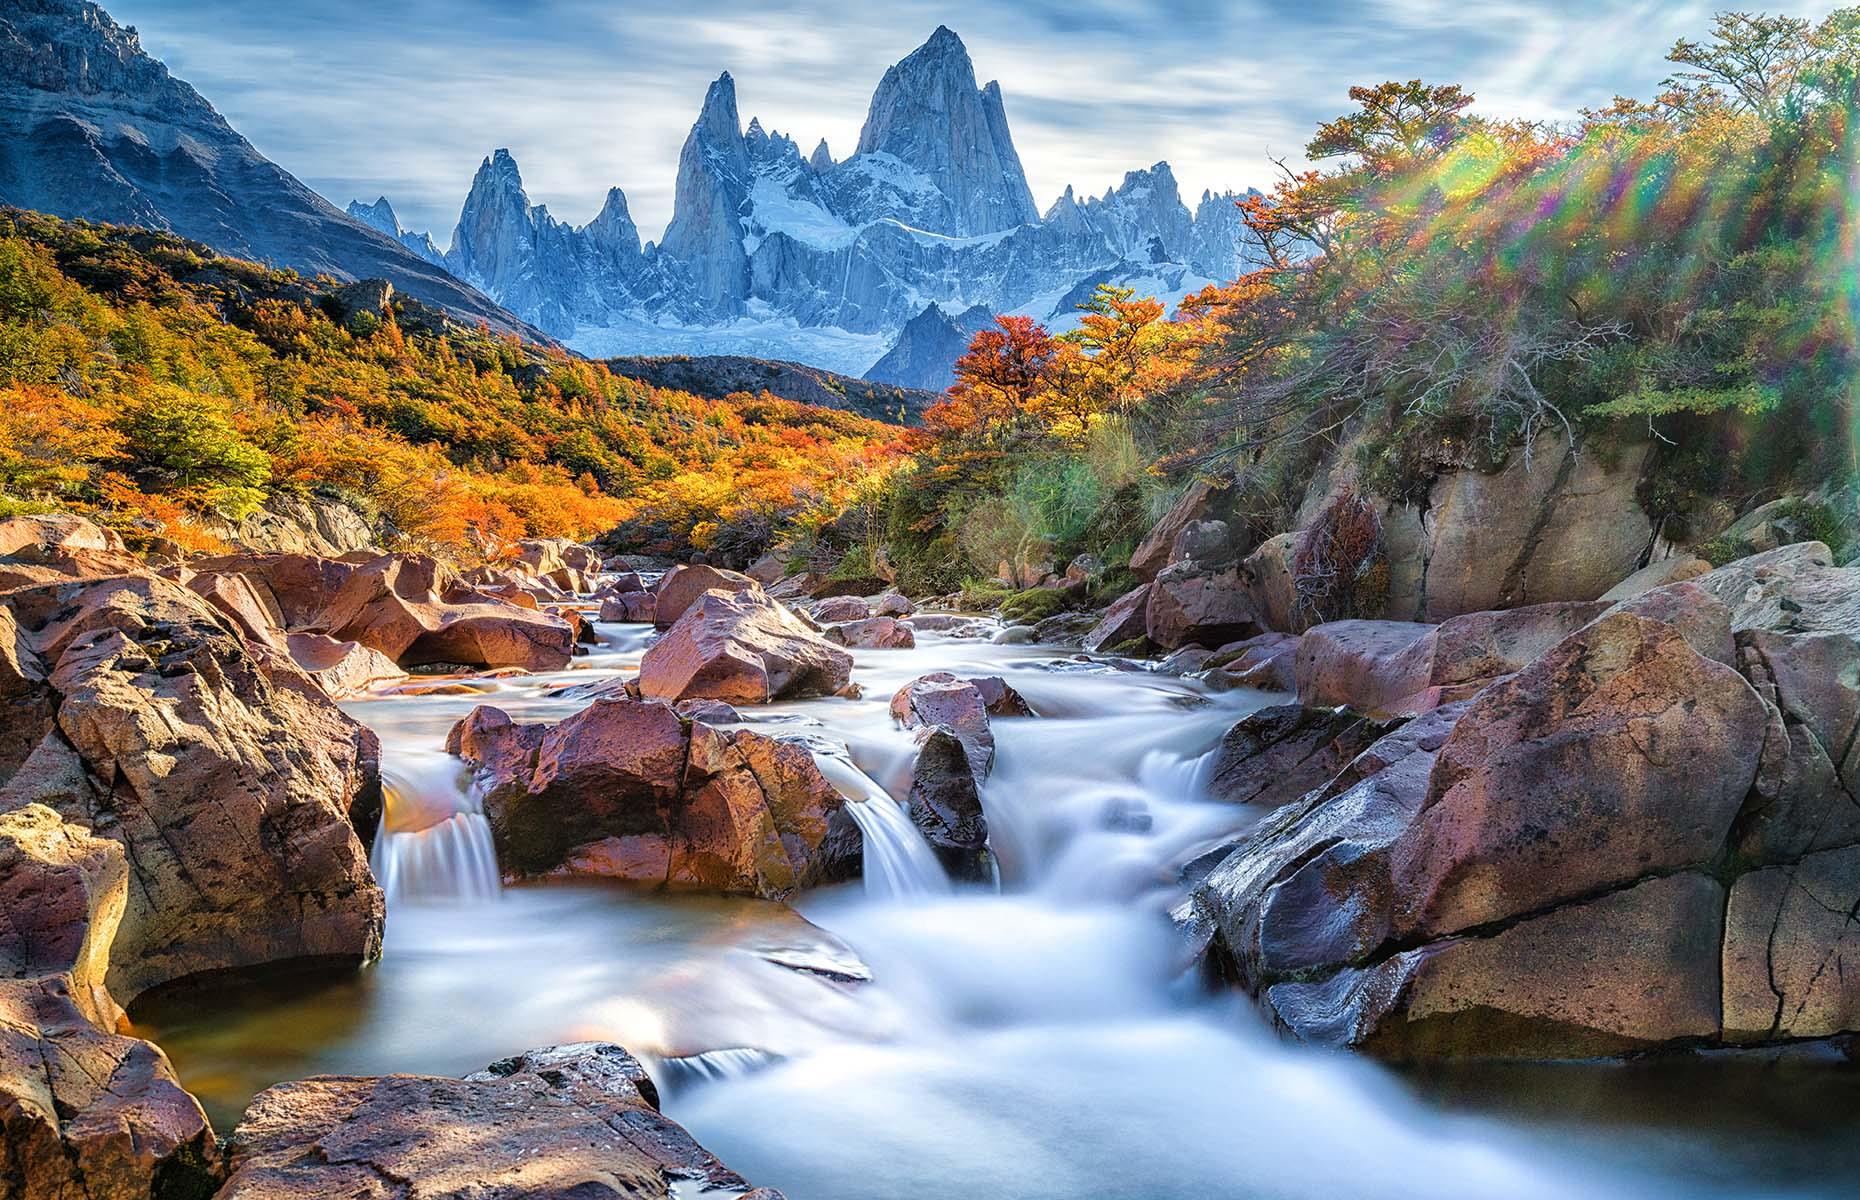 A rugged landscape of jagged peaks, shimmering lakes, ancient forests and vast glaciers, Patagonia is a region that captures the imagination and has an irresistible appeal for adventurers. The three sharp granite towers that rise bewitchingly in the background of this image are one of the vast national park's most striking landmarks. Known as Torres del Paine, they formed over 12 million years ago.